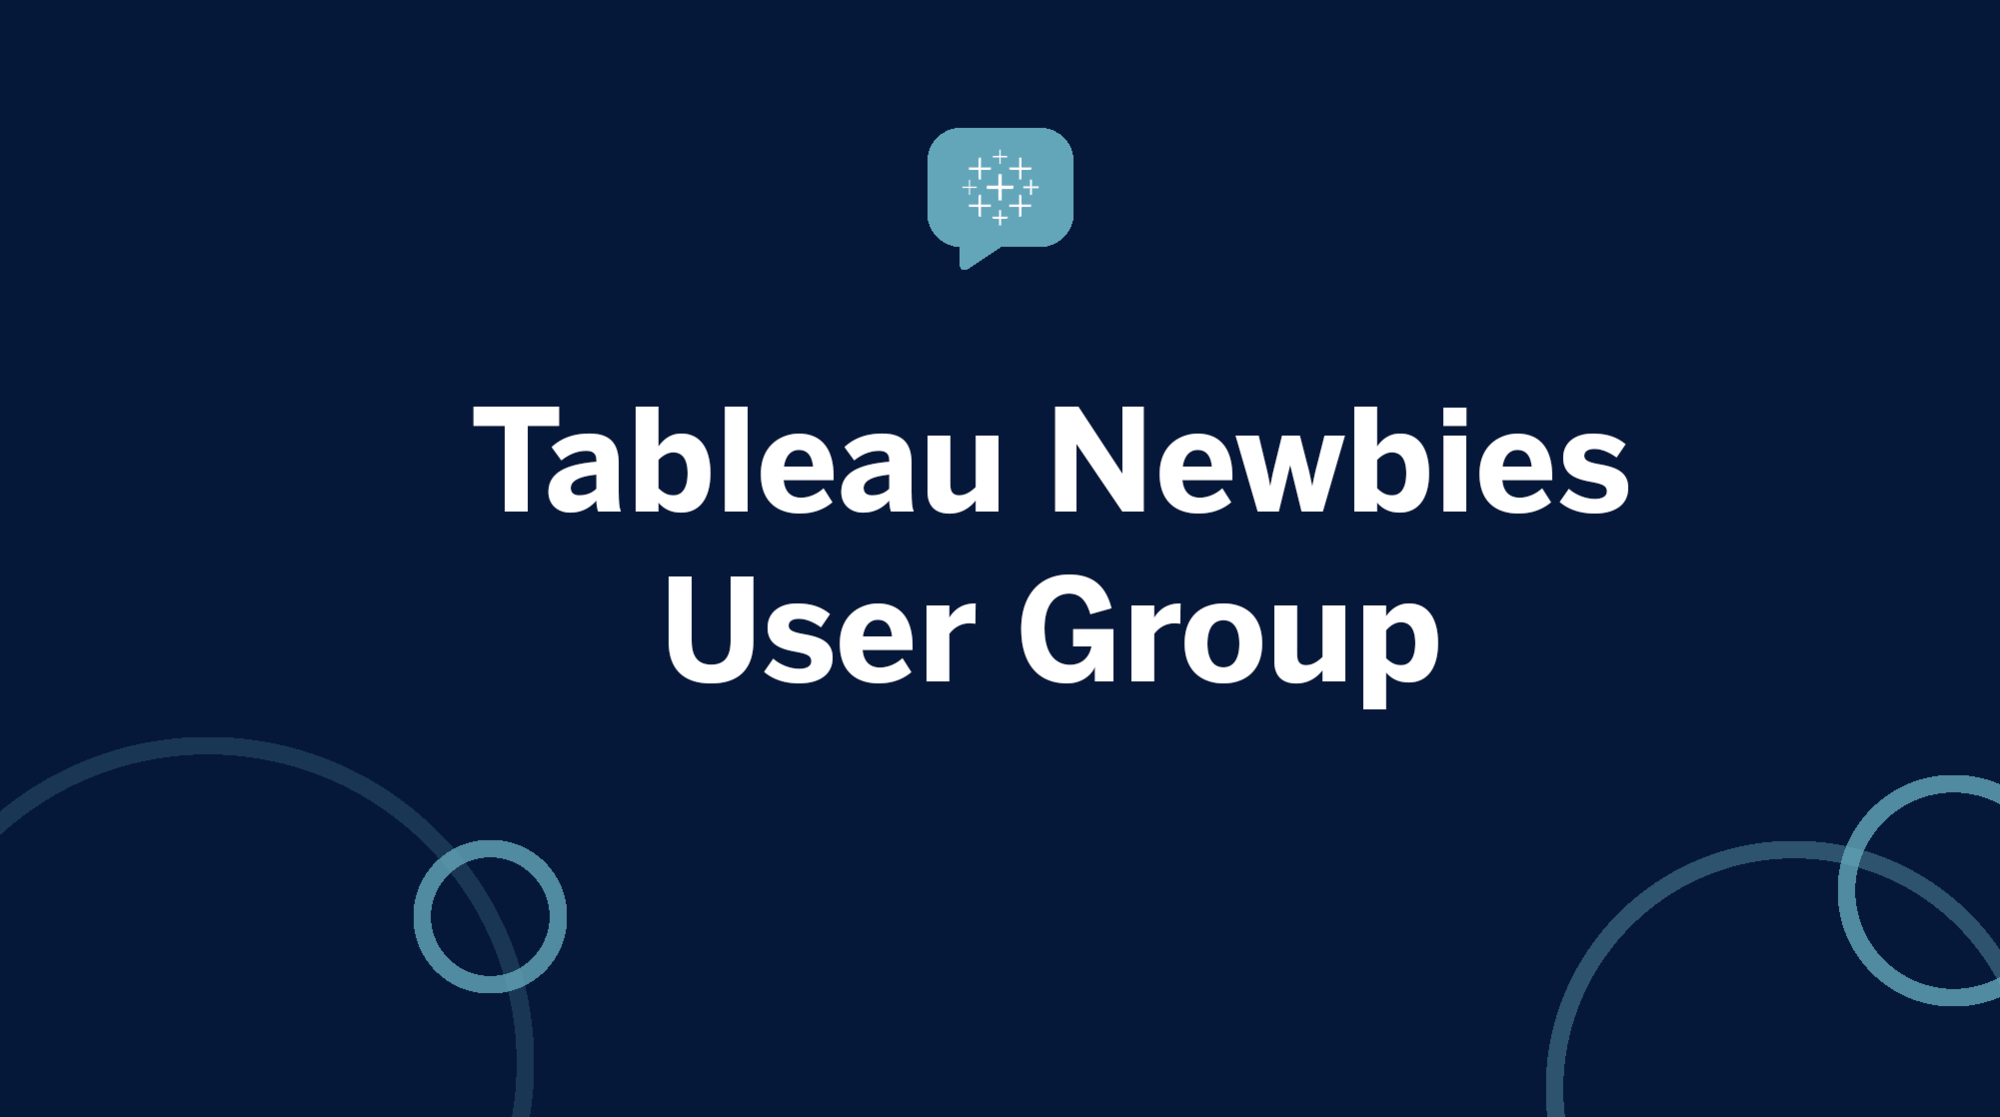 Opens a new window to the event page for Florida Tableau User Group Meetup